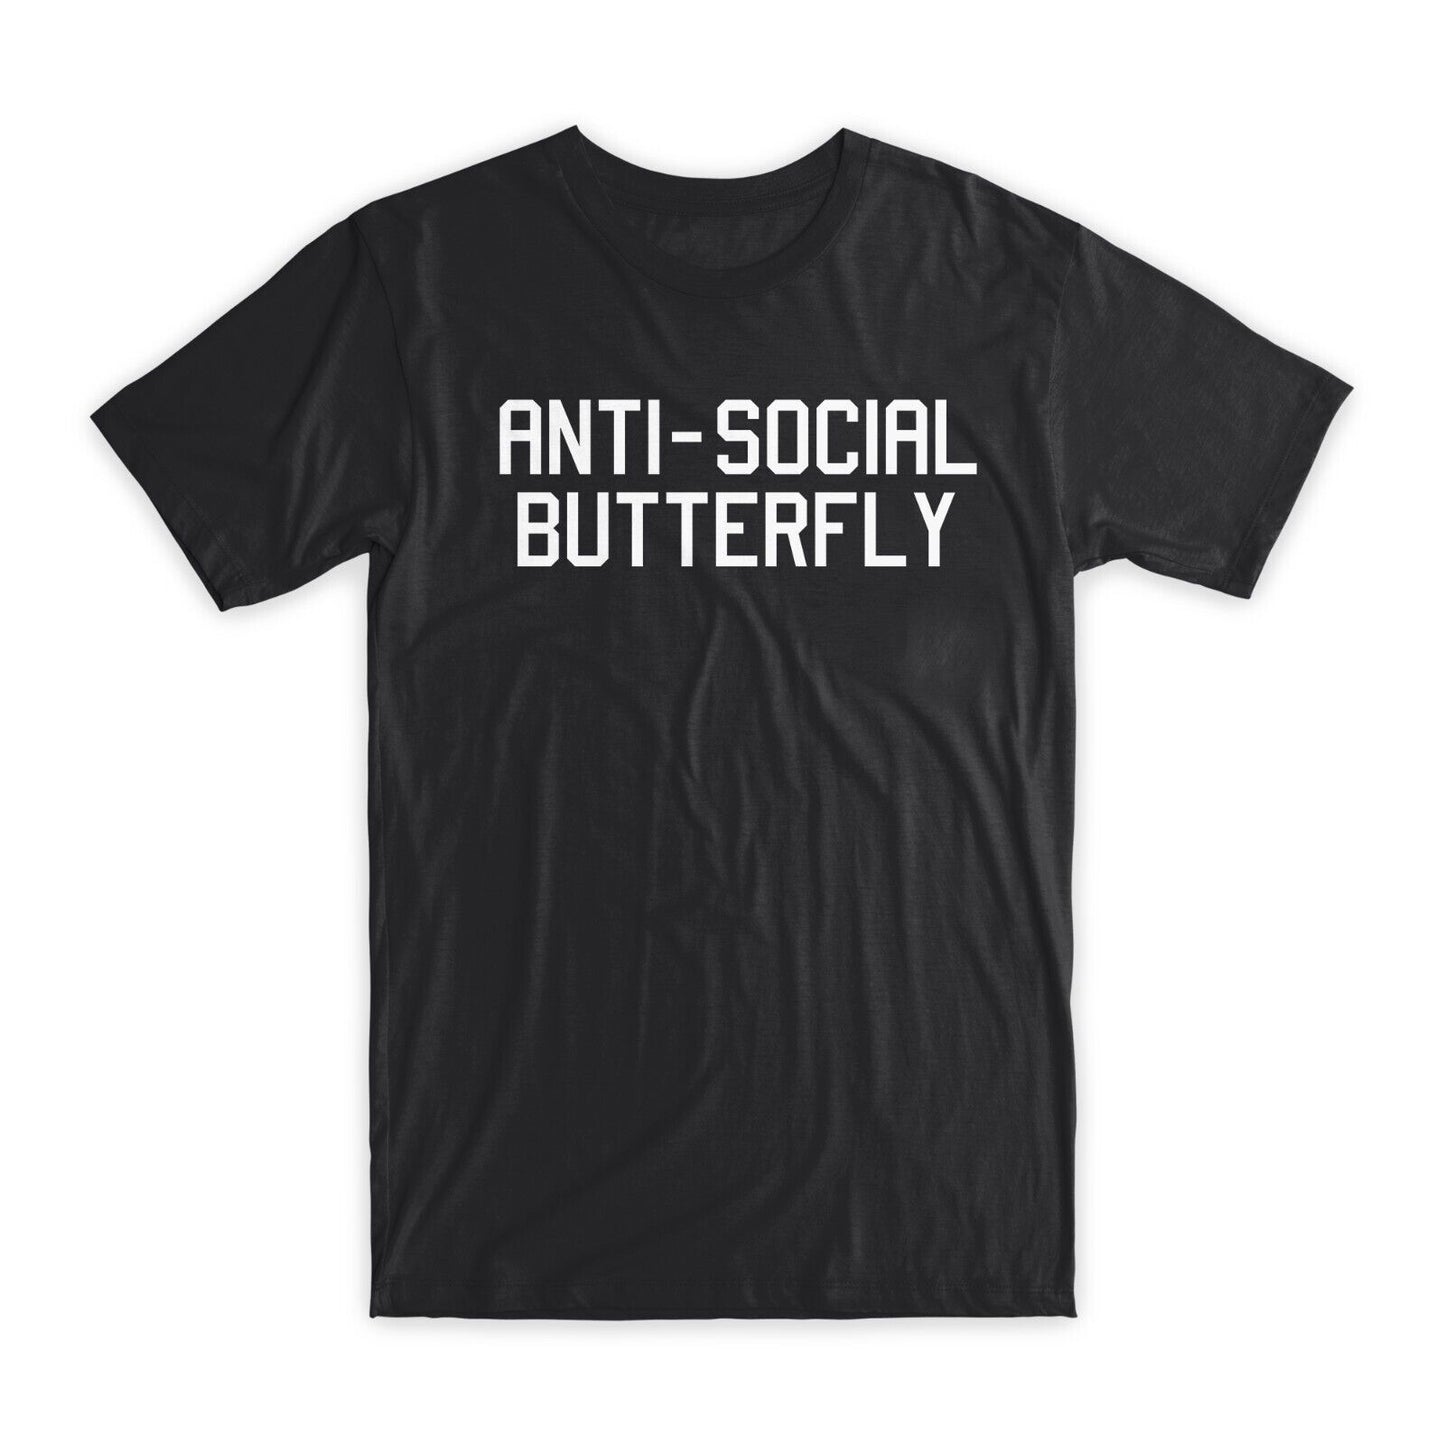 Anti-Social Butterfly T-Shirt Premium Soft Cotton Crew Neck Funny Tees Gifts NEW